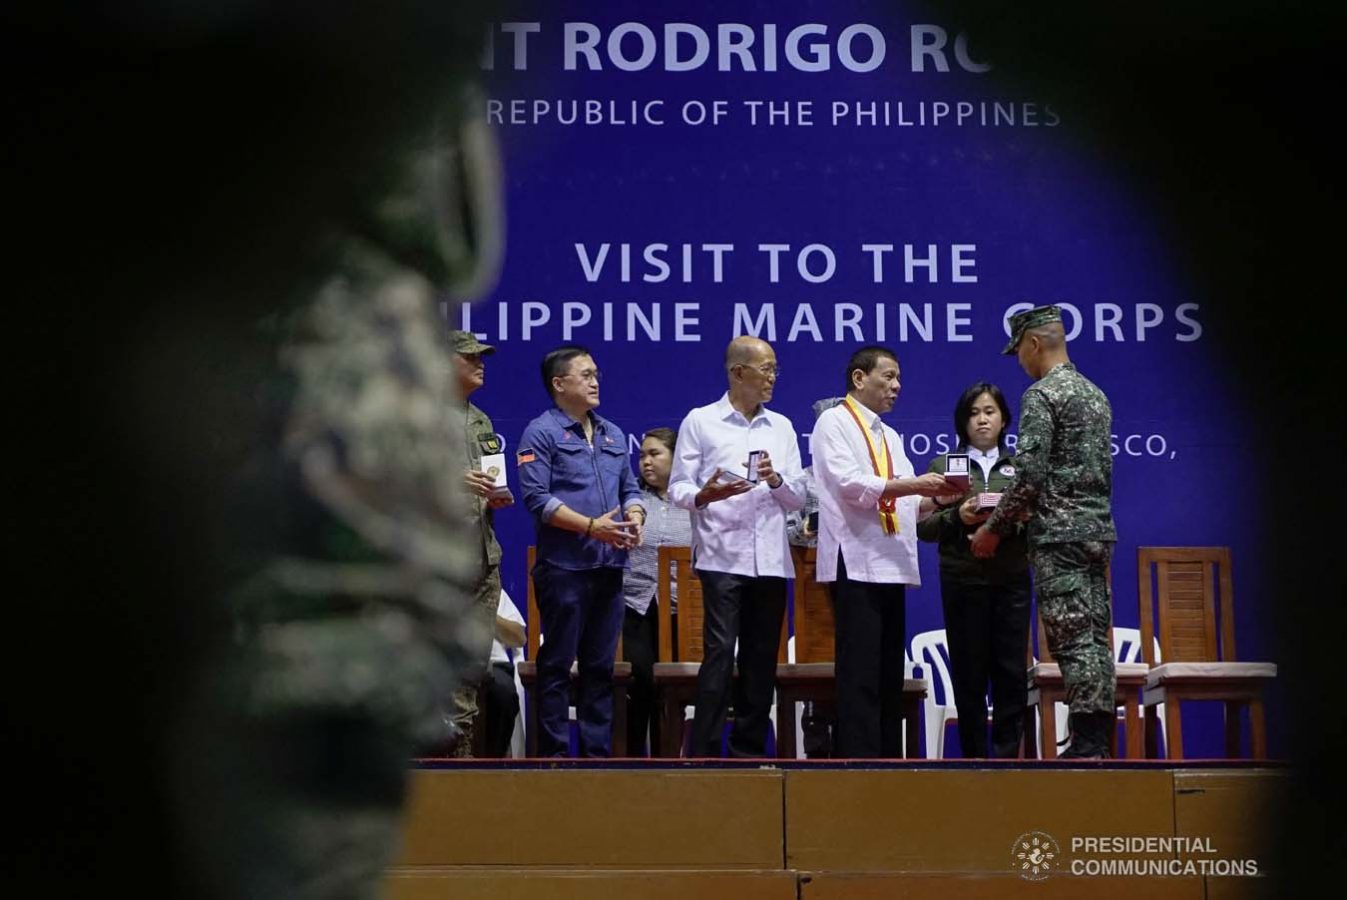 President Rodrigo Roa Duterte confers the Order of Lapu-Lapu Rank of Kamagi on one of the Philippine Marine Corps (PMC) personnel during his visit to the PMC headquarters at Fort Bonifacio in Taguig City on January 13, 2020. The President honored the PMC personnel who took part in the liberation of Marawi City from the terrorists. KING RODRIGUEZ/PRESIDENTIAL PHOTO